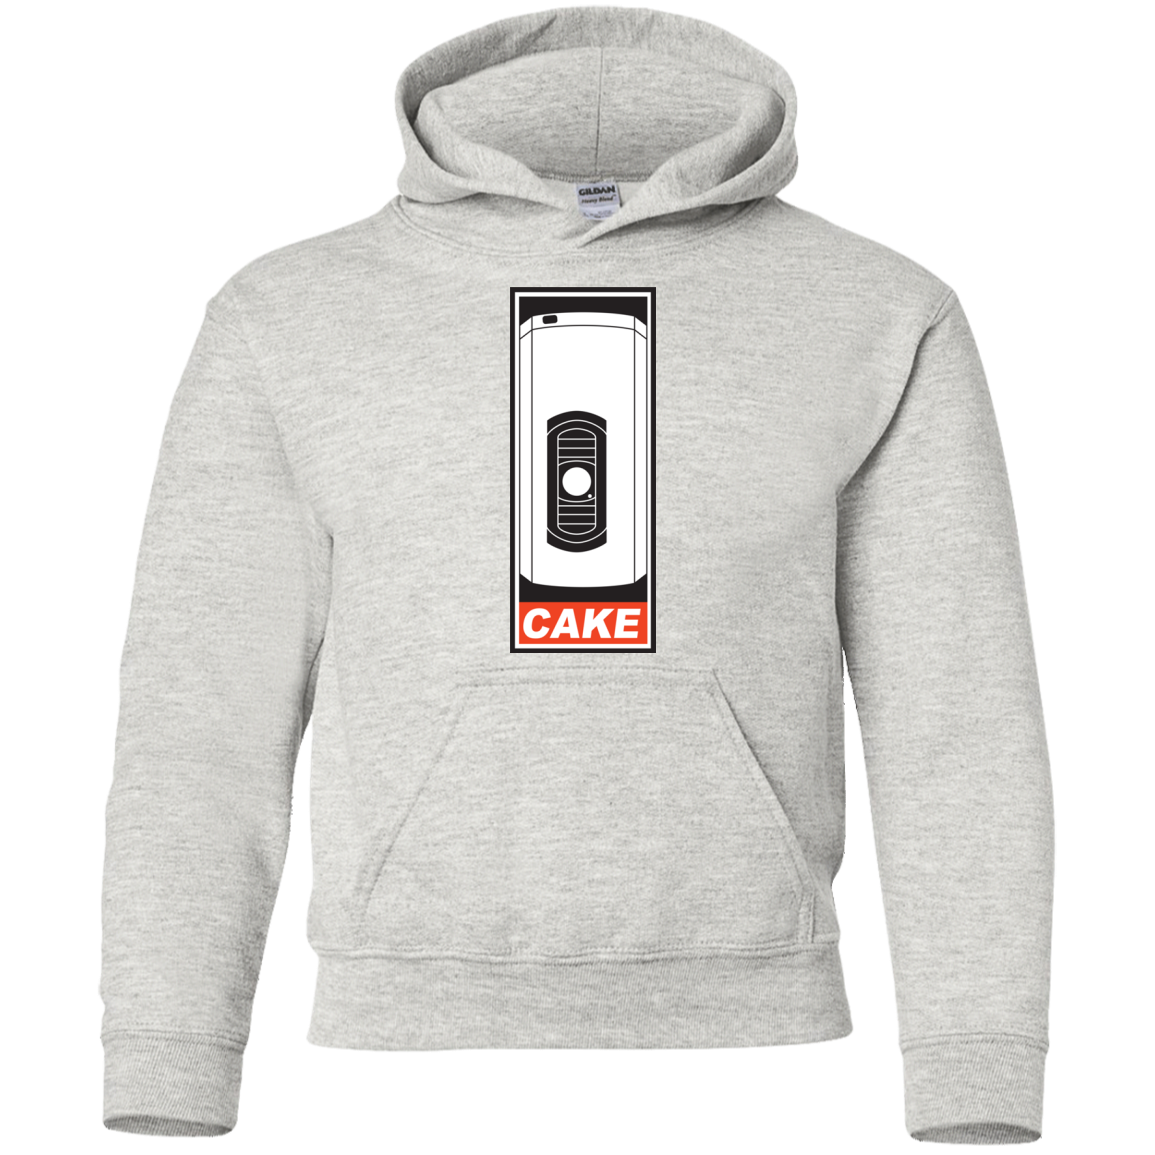 Cake is a Lie Youth Hoodie